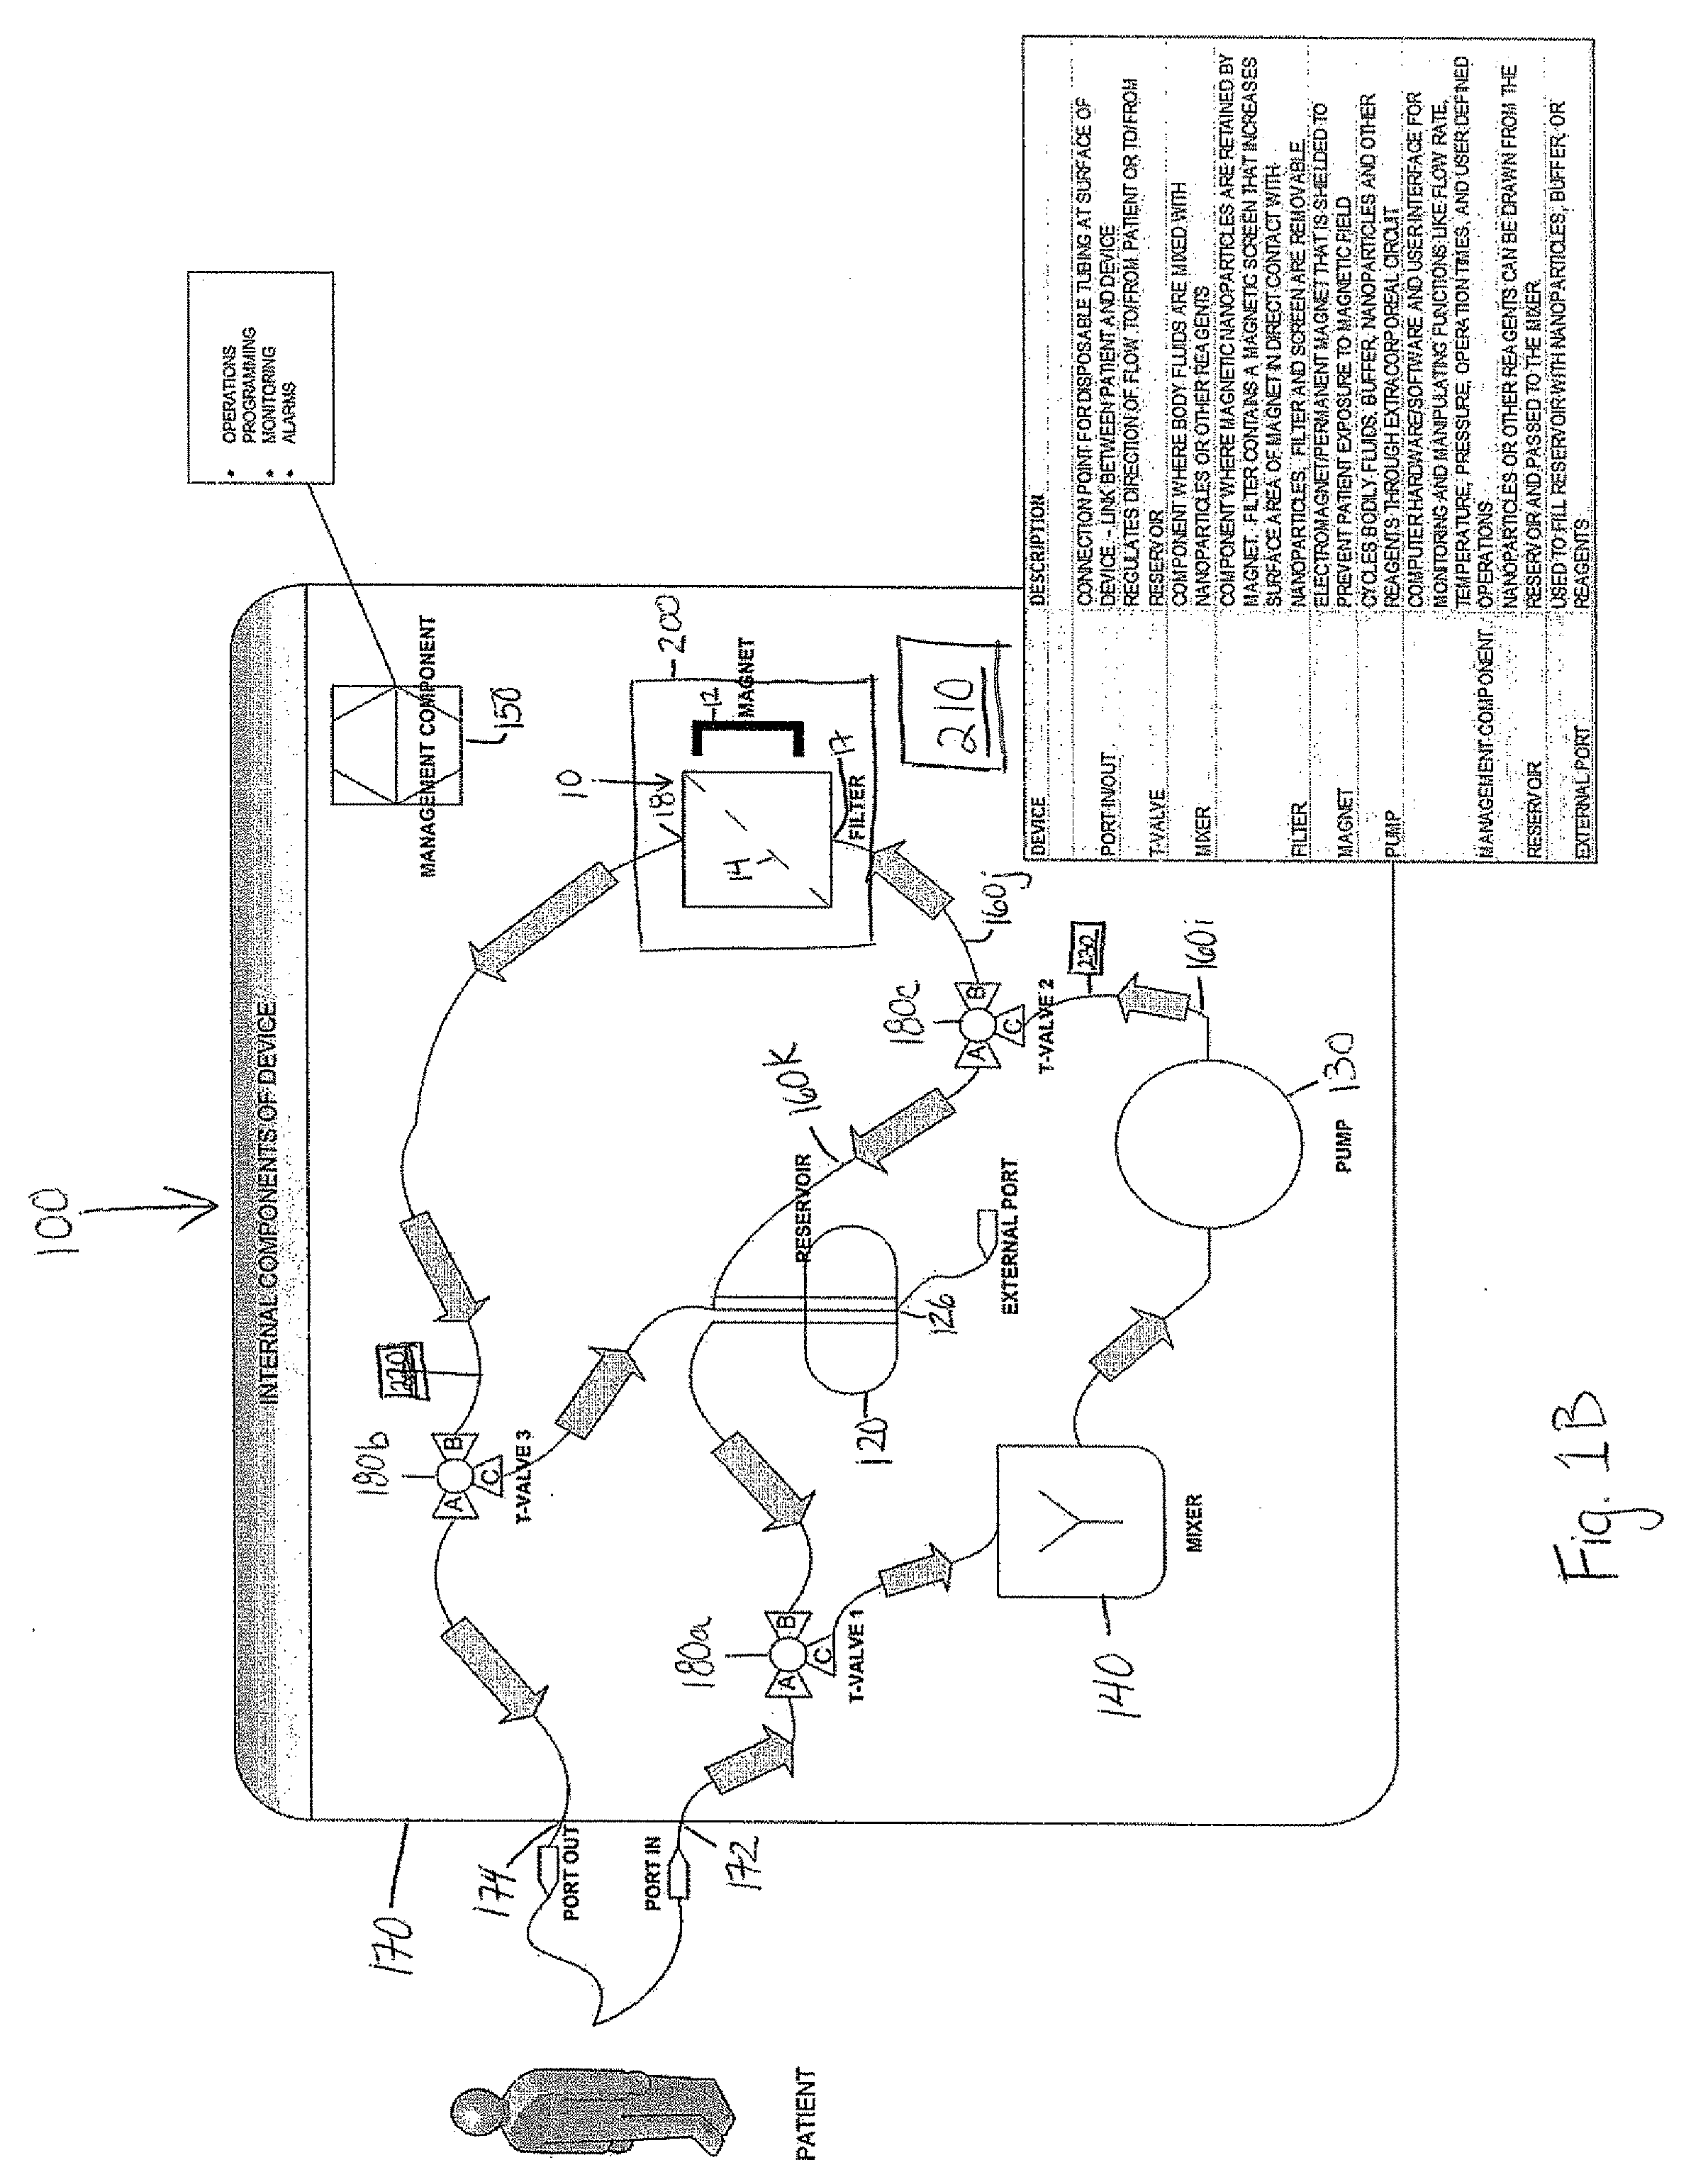 Device and method of using superparamagnetic nanoparticles in treatment and removal of cells